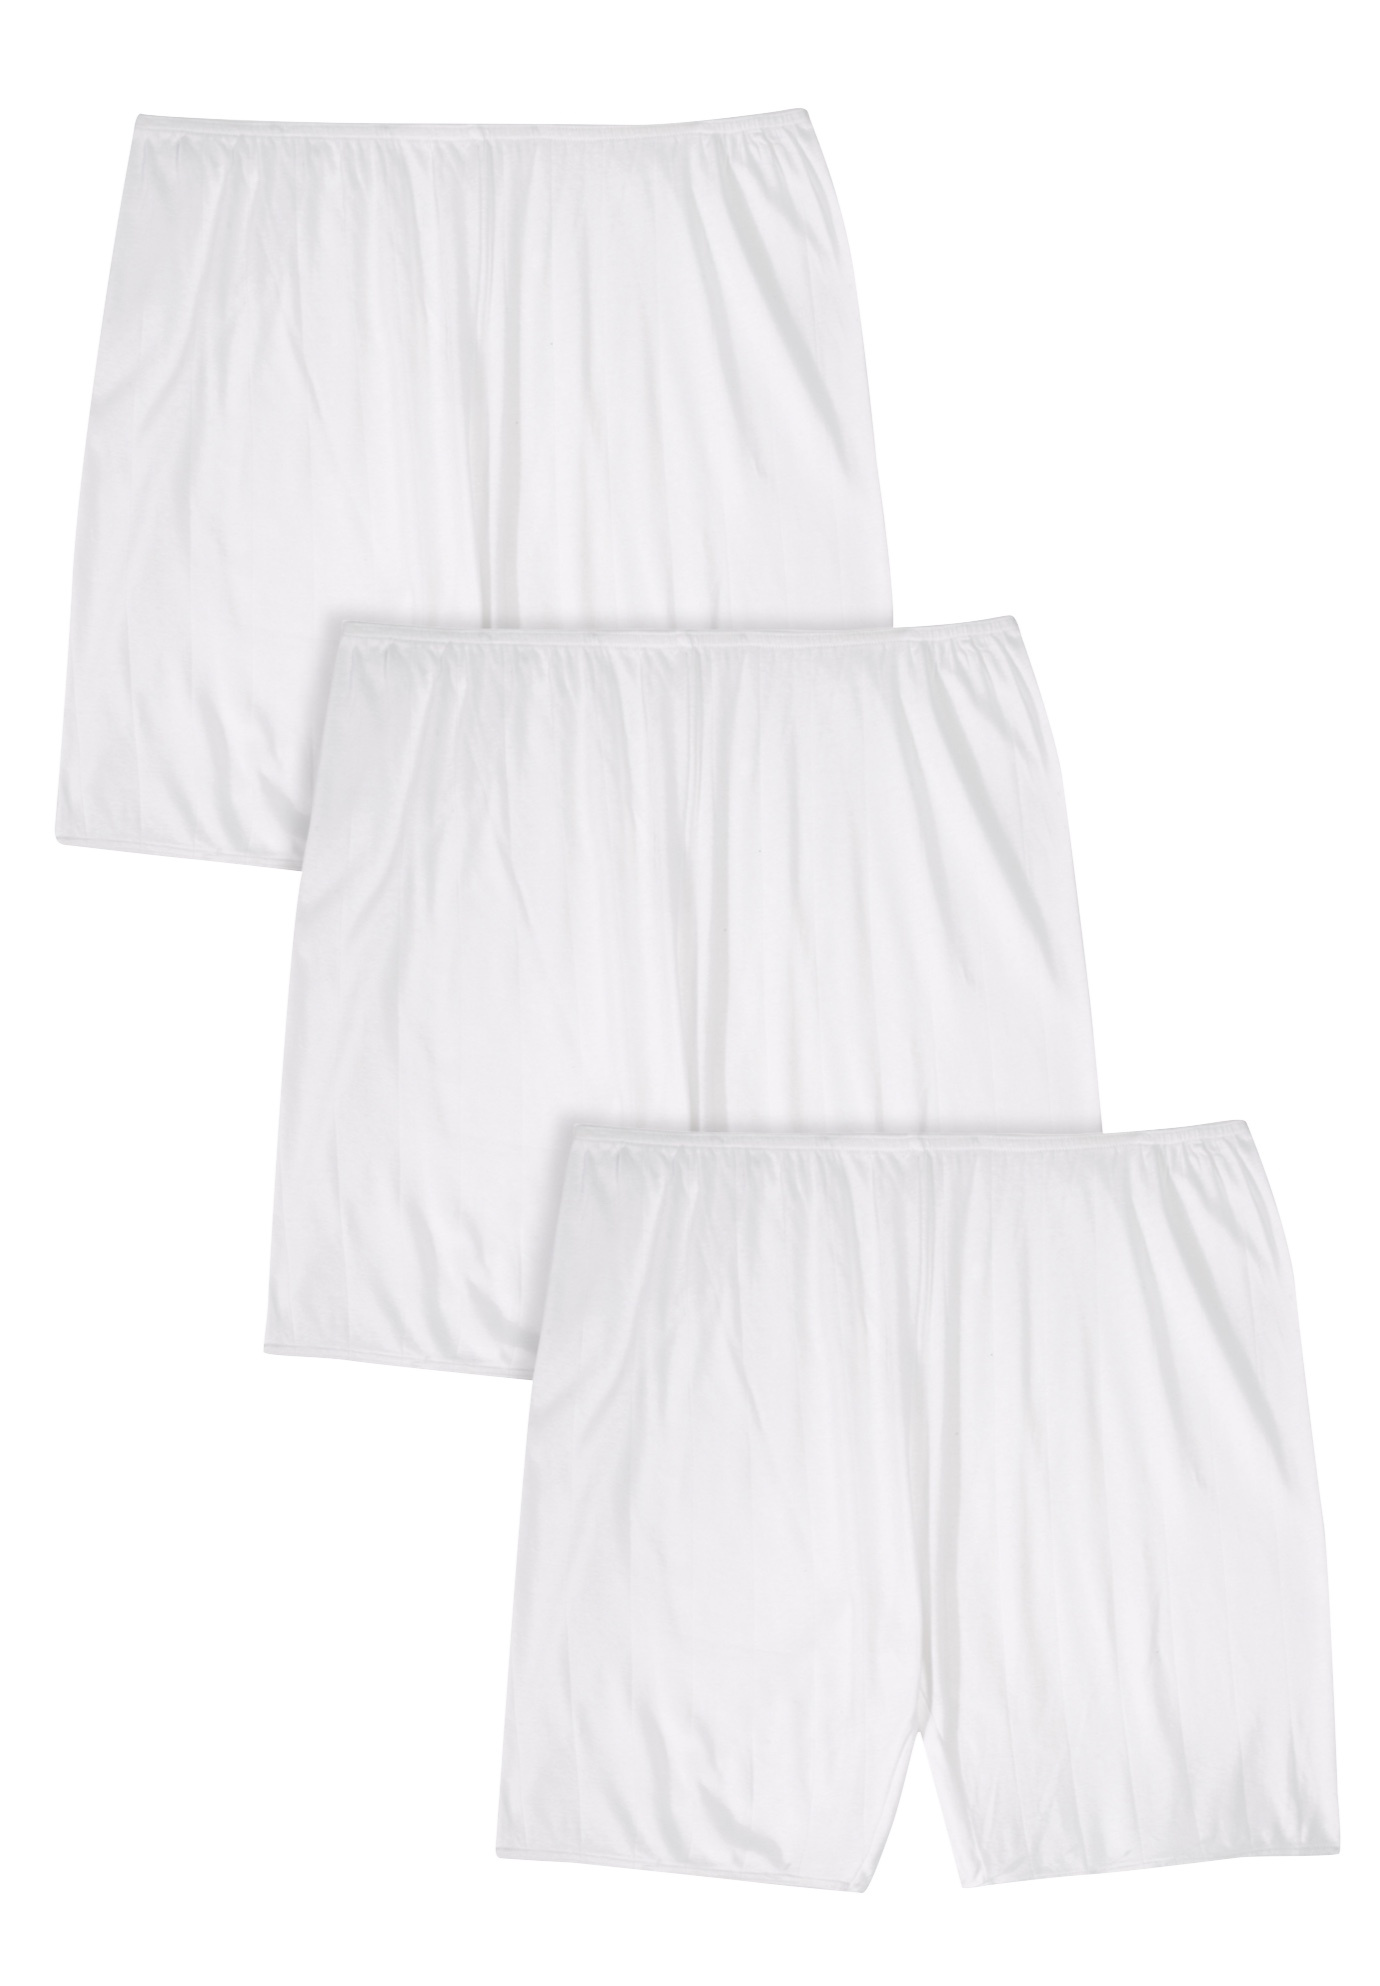 Comfort Choice Womens Plus Size 3-Pack Cotton Bloomer Panties